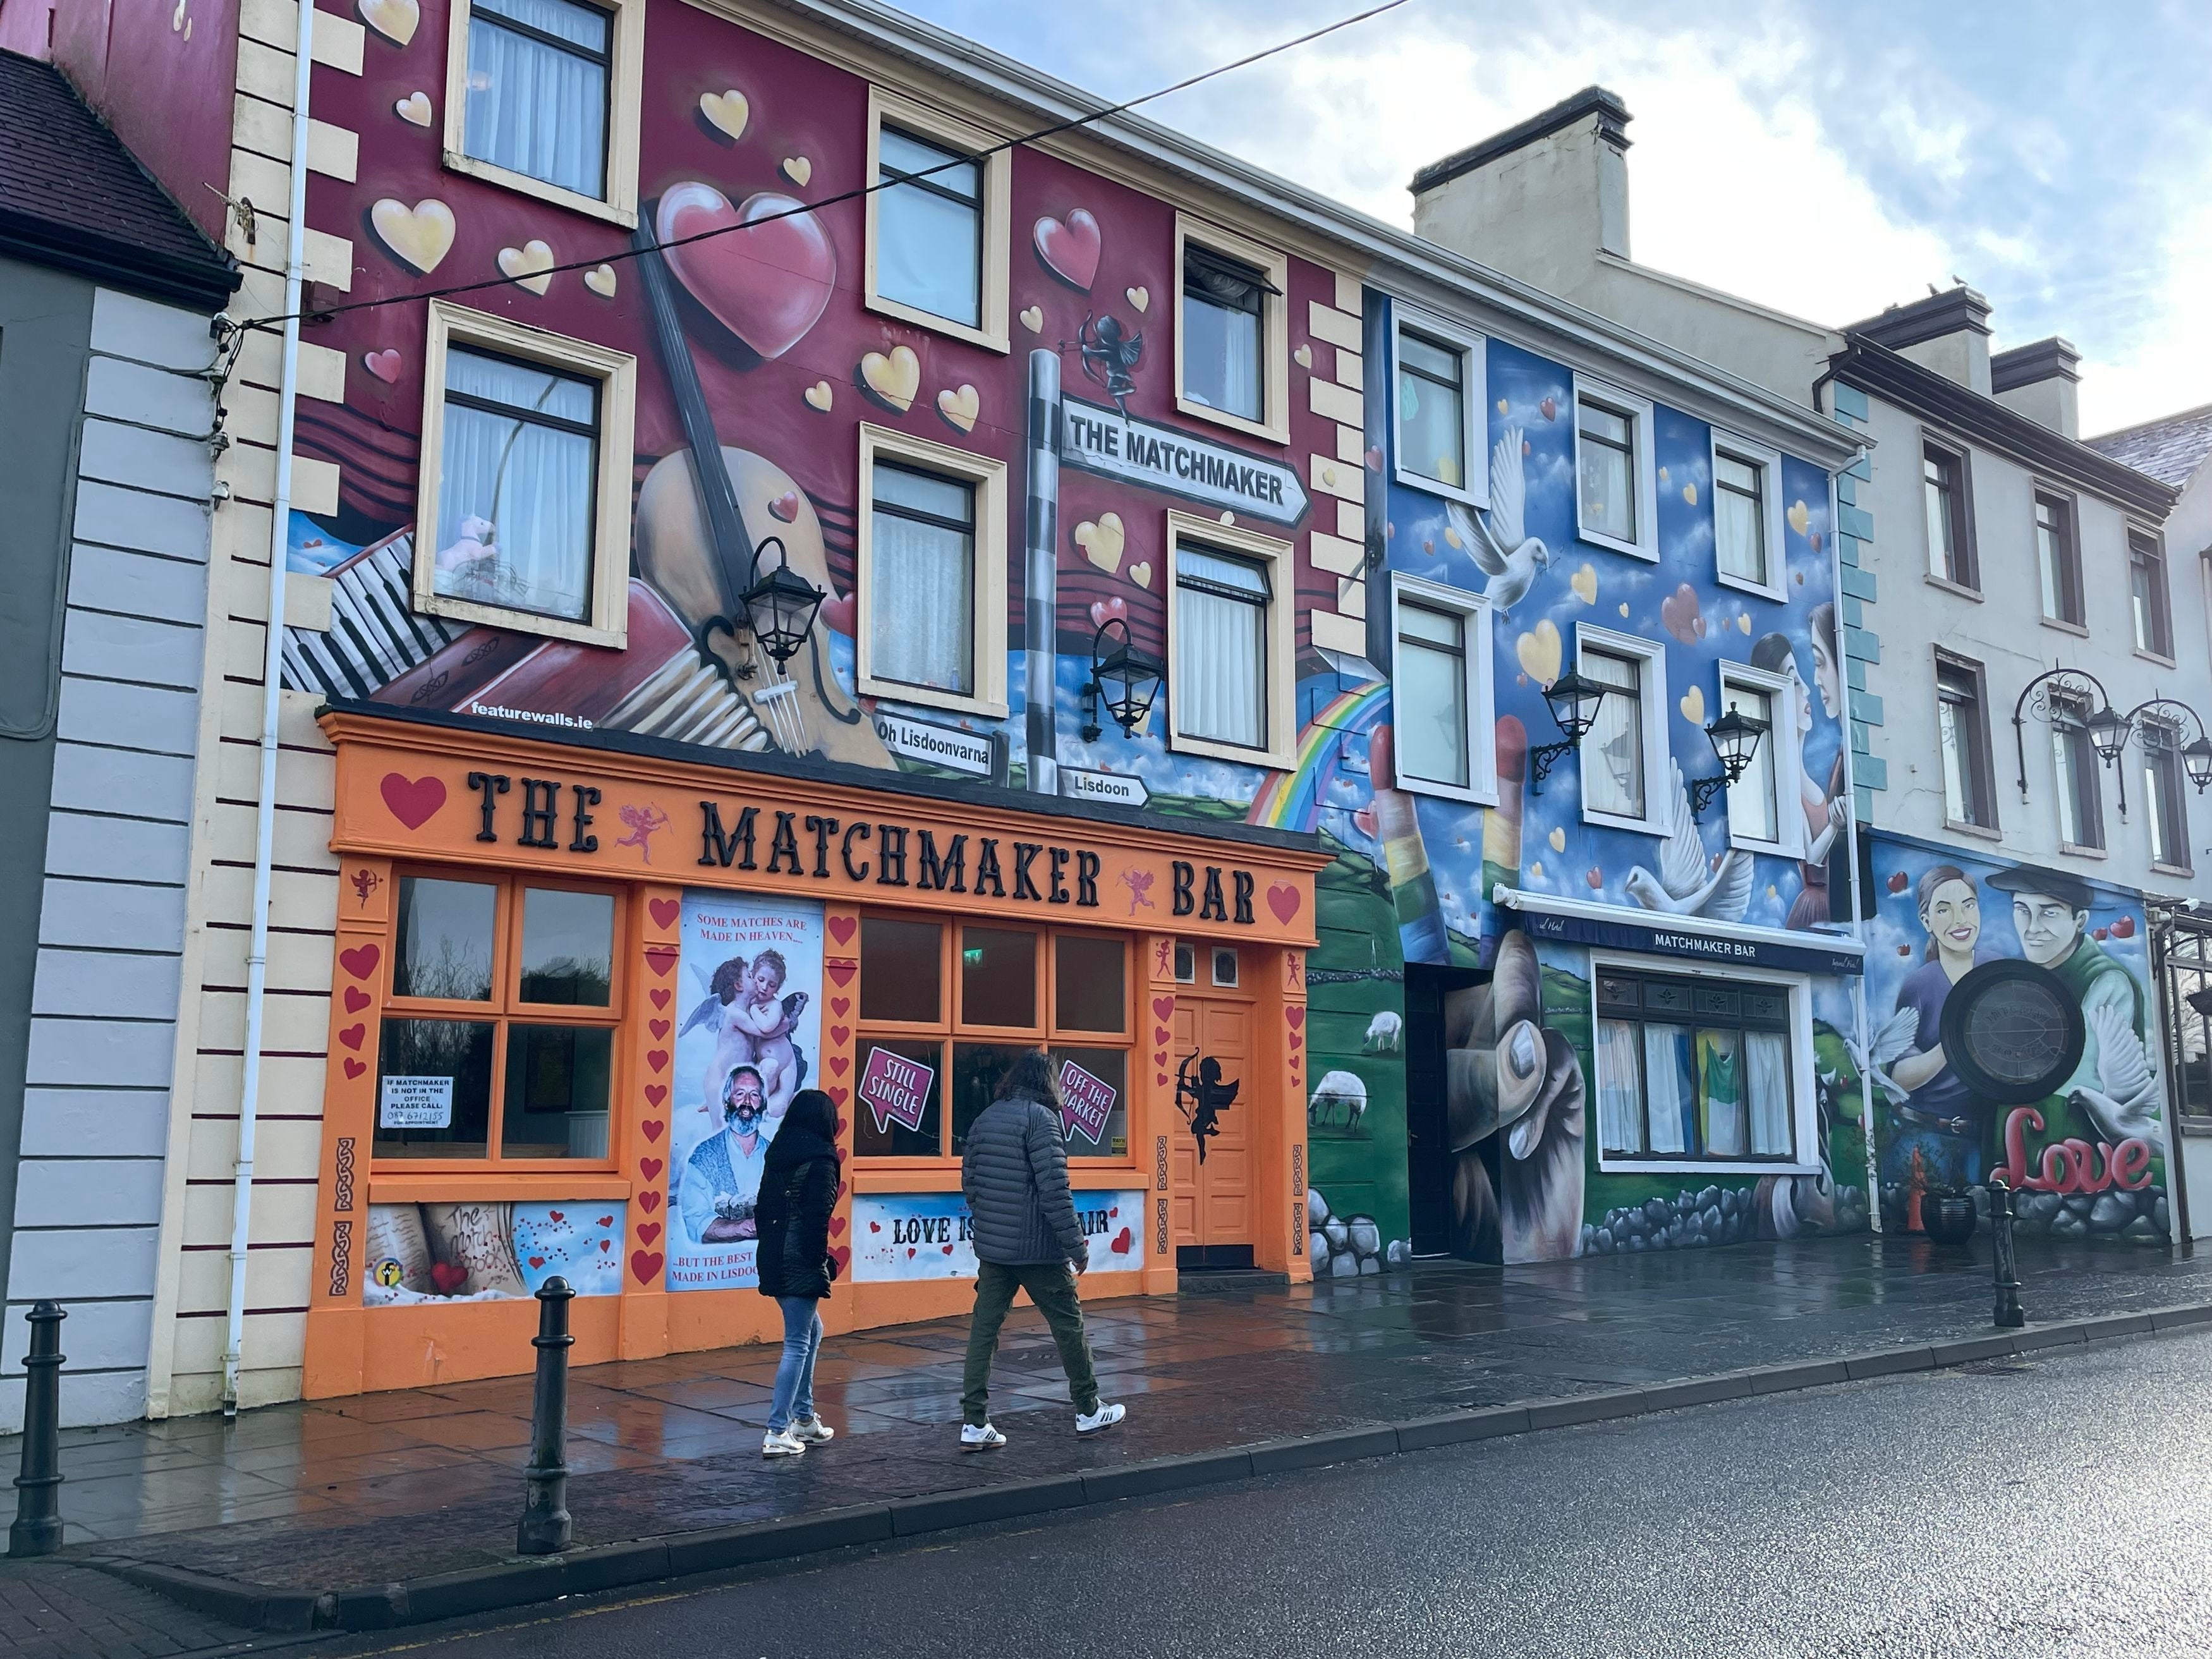 The Matchmaker Bar in Lisdoonvarna, the home town of Ireland’s last traditional matchmaker Willie Daly, which hosts an annual match making festival every September